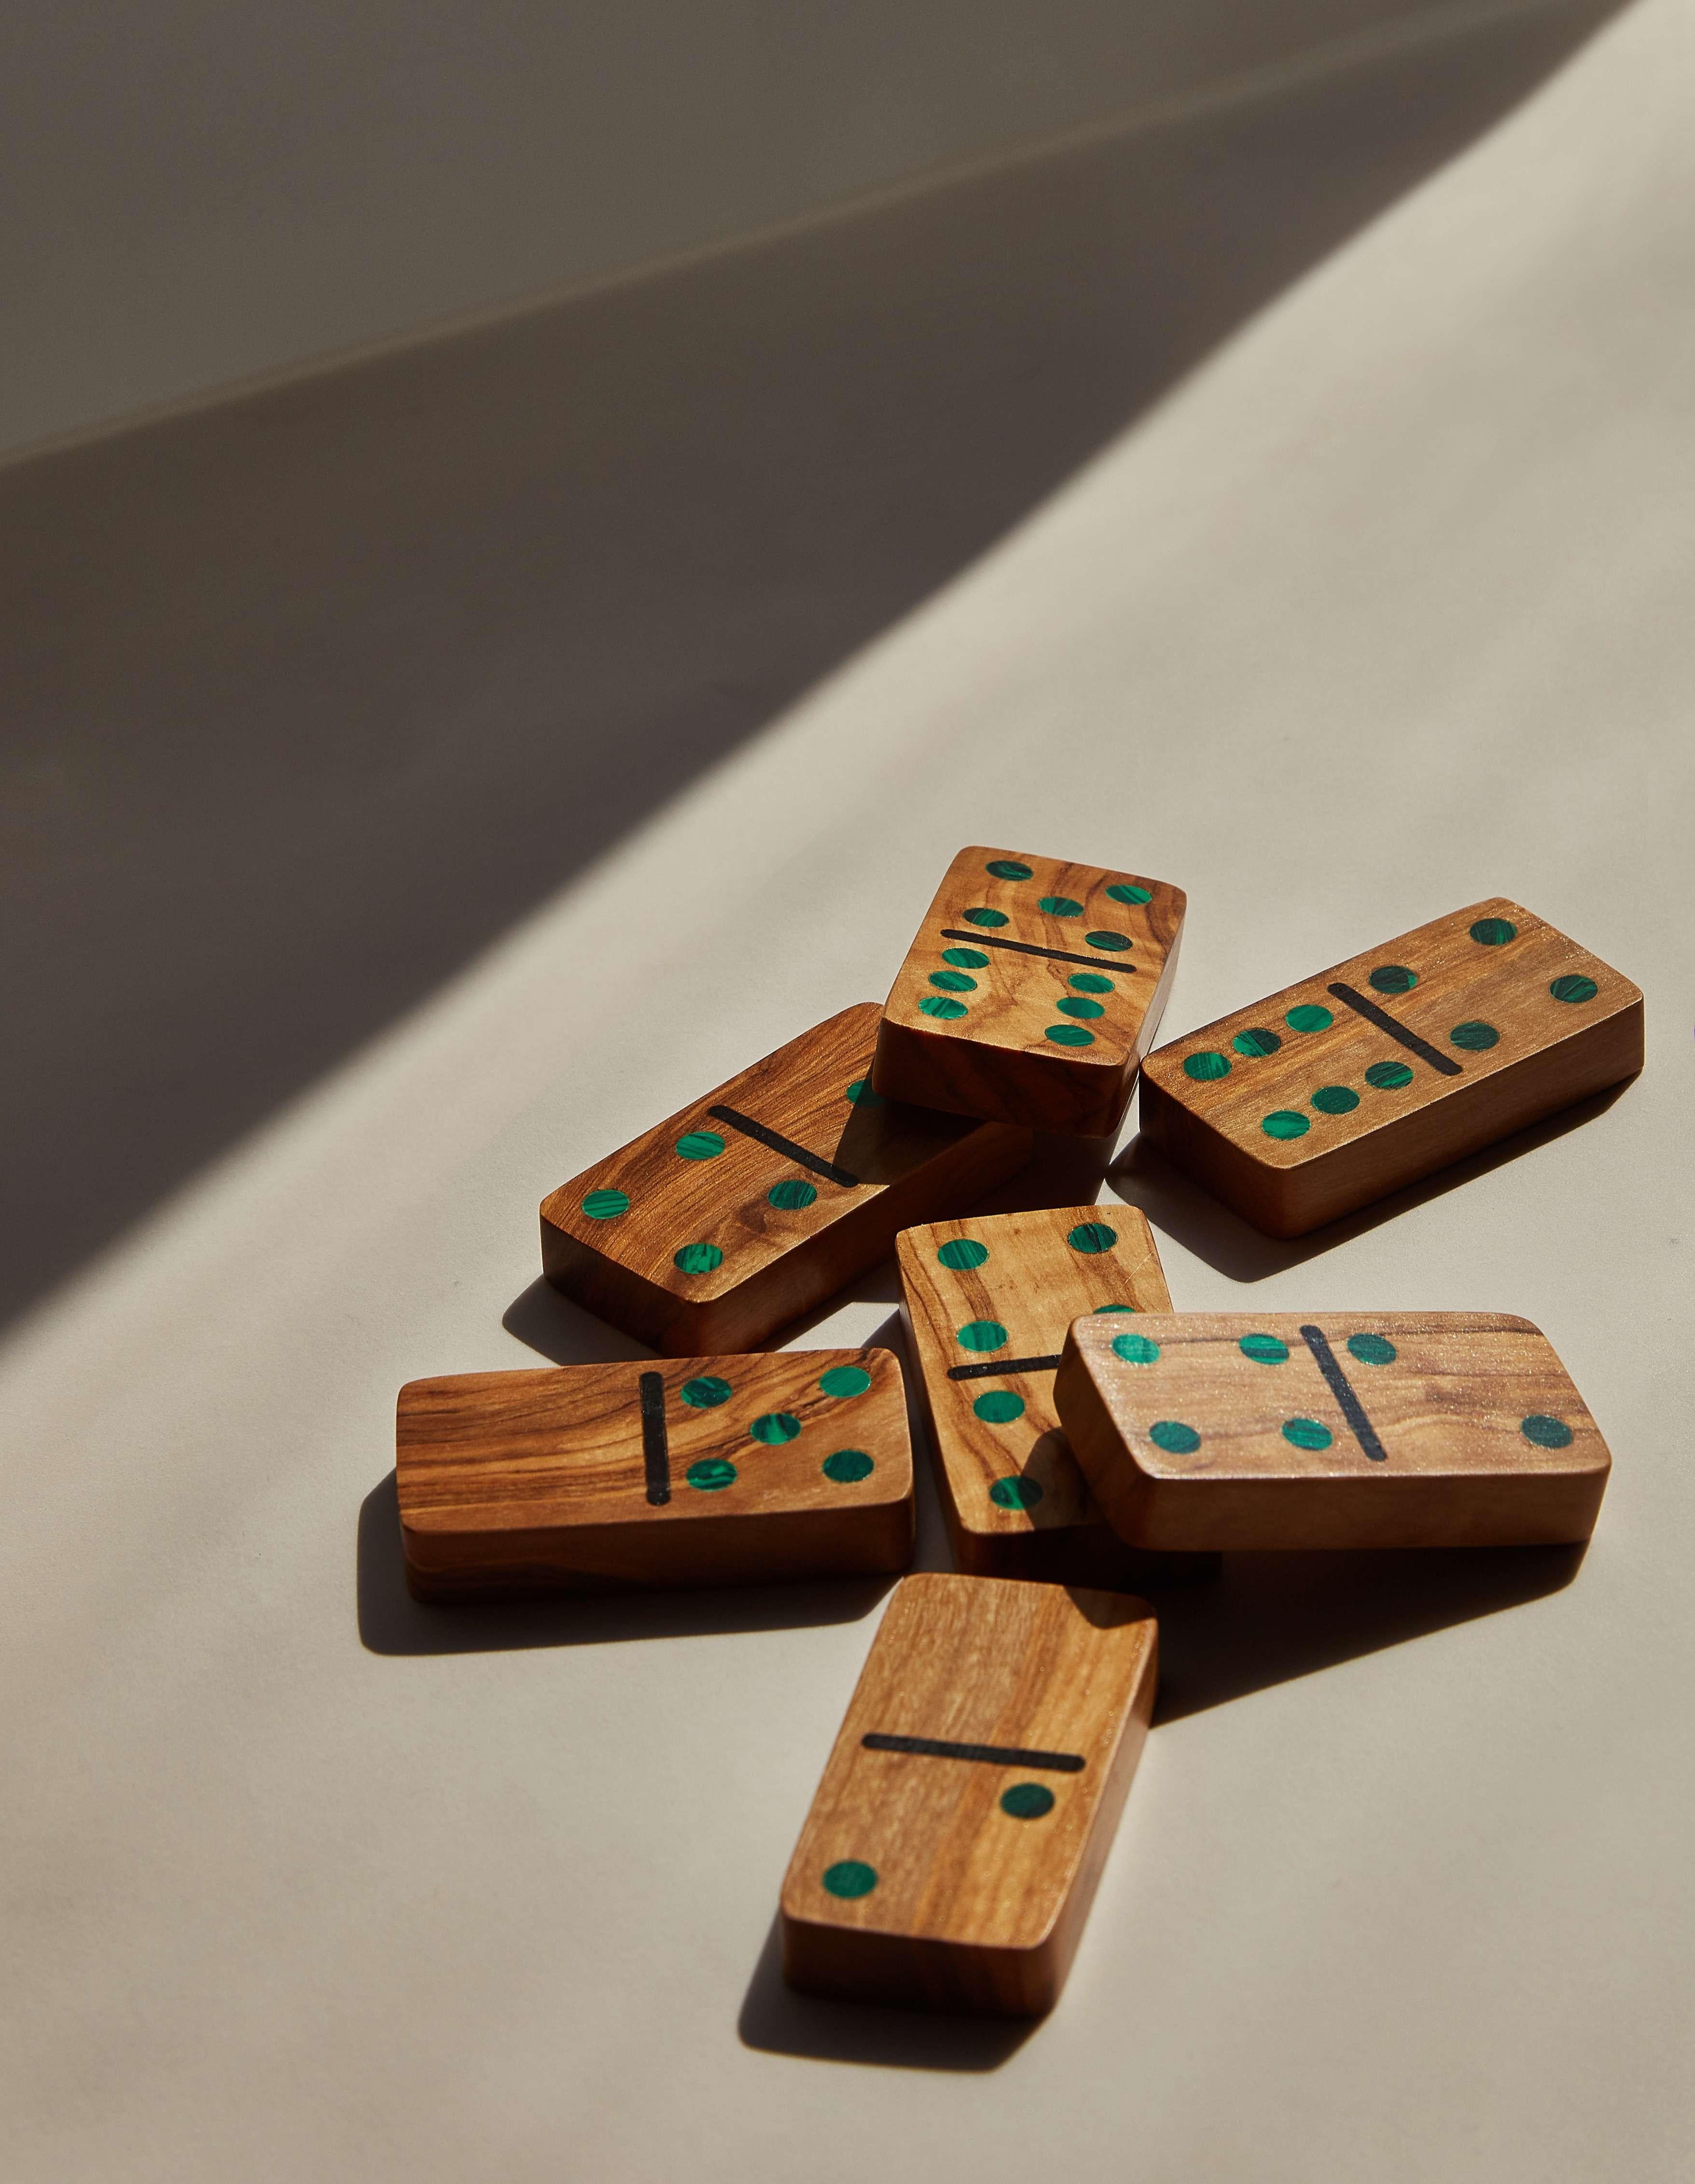 Hand-Crafted Marcela Cure Small Pui Wood and Malachite Domino Set - 28 pcs in leather box For Sale